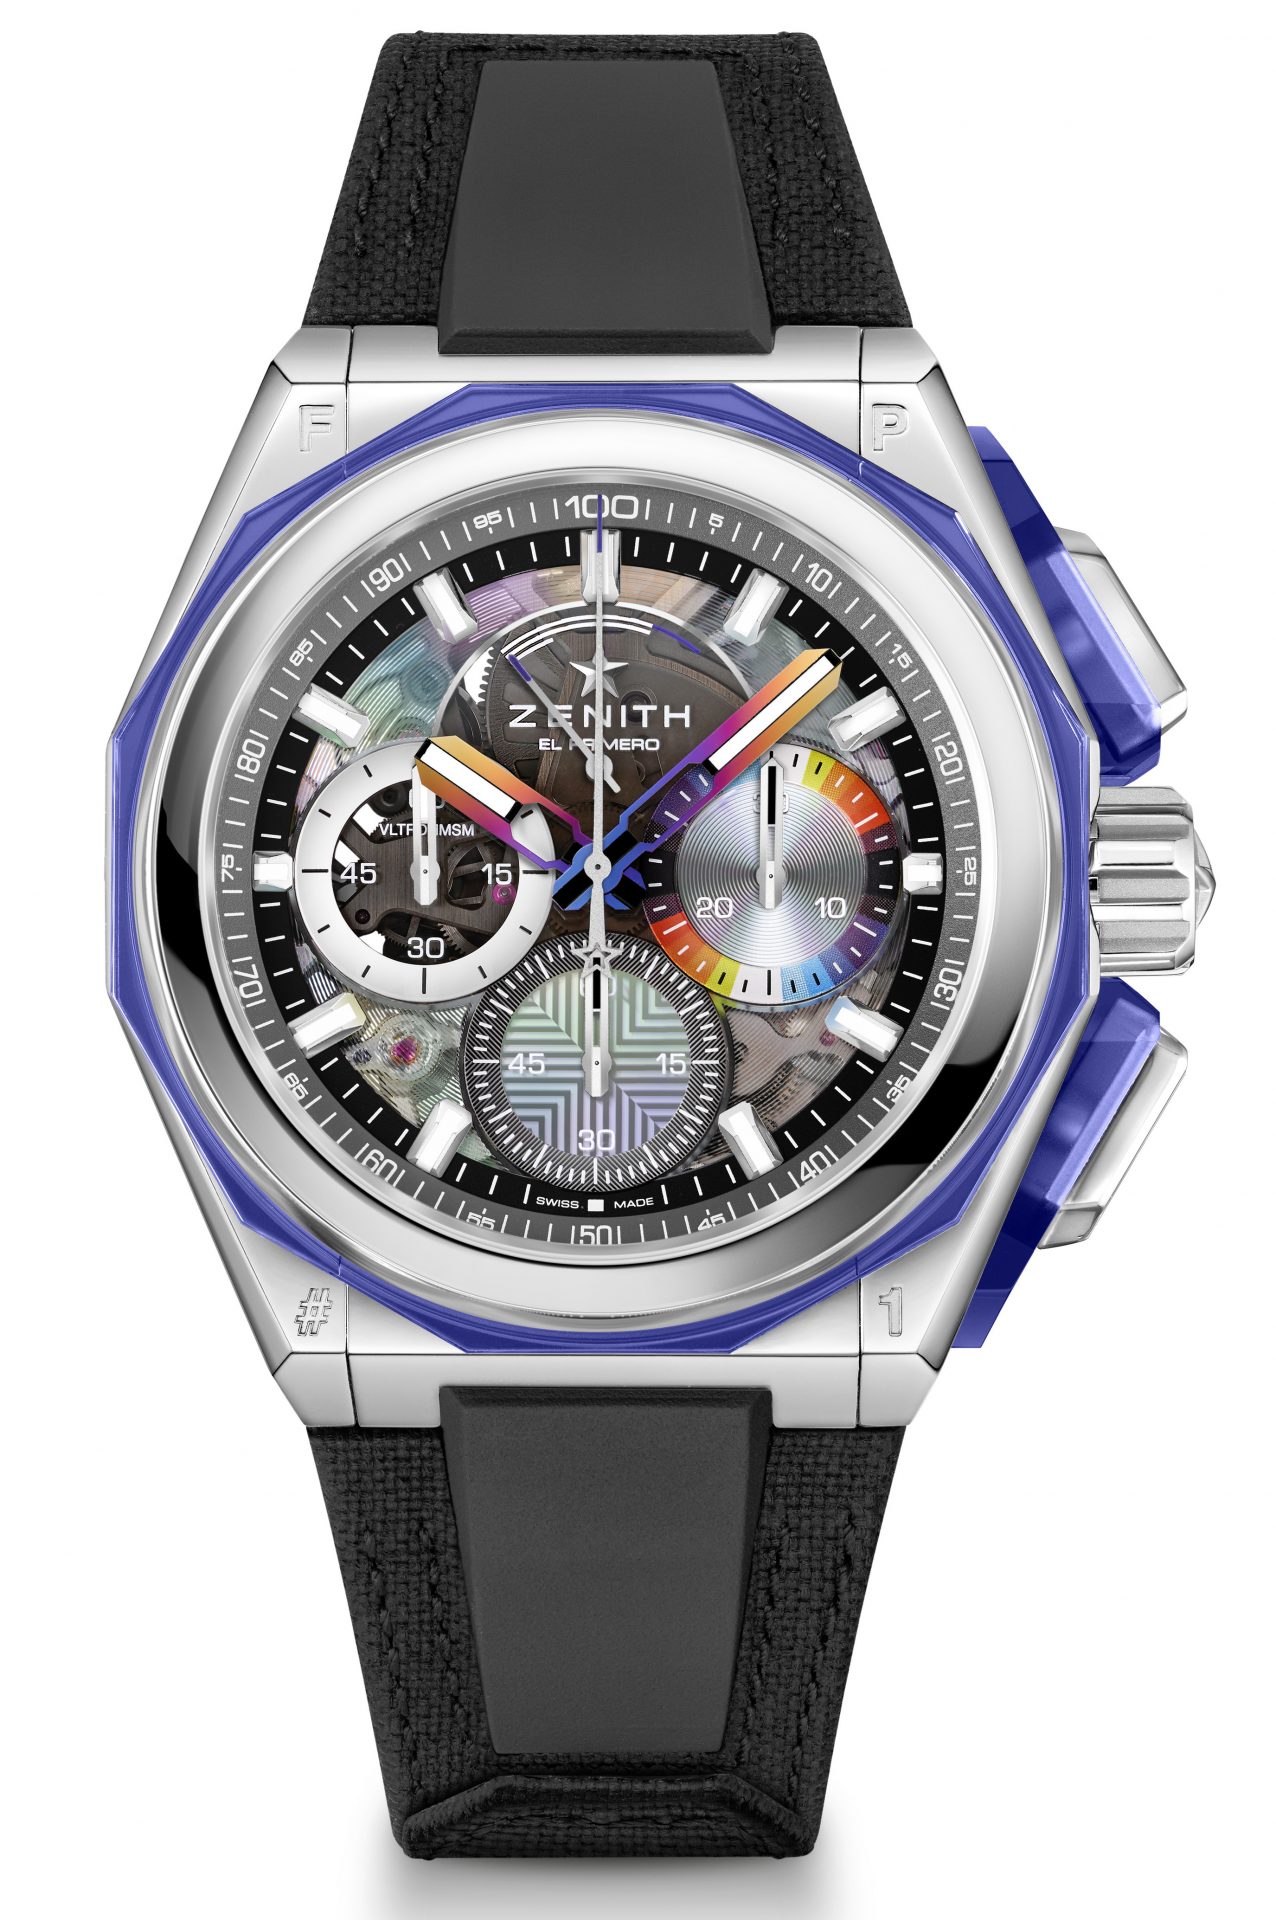 Felipe Pantone brings riot of color to limited edition Zenith Defy Extreme